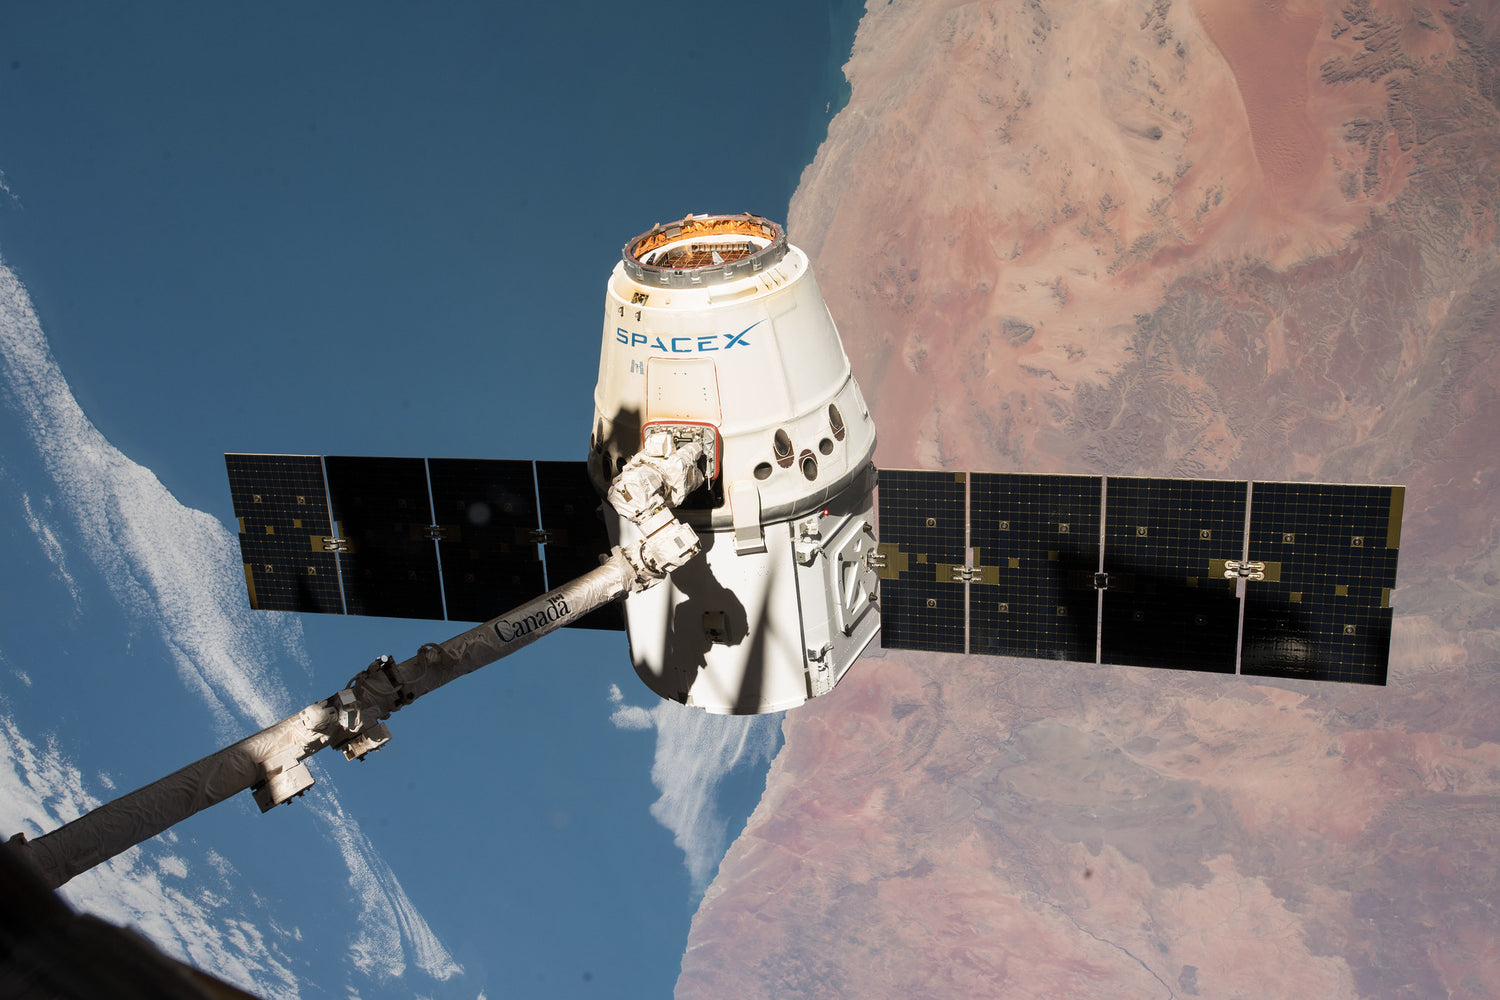 SpaceX Dragon arrived to the International Space Station this morning with over 5,700 pounds of cargo!